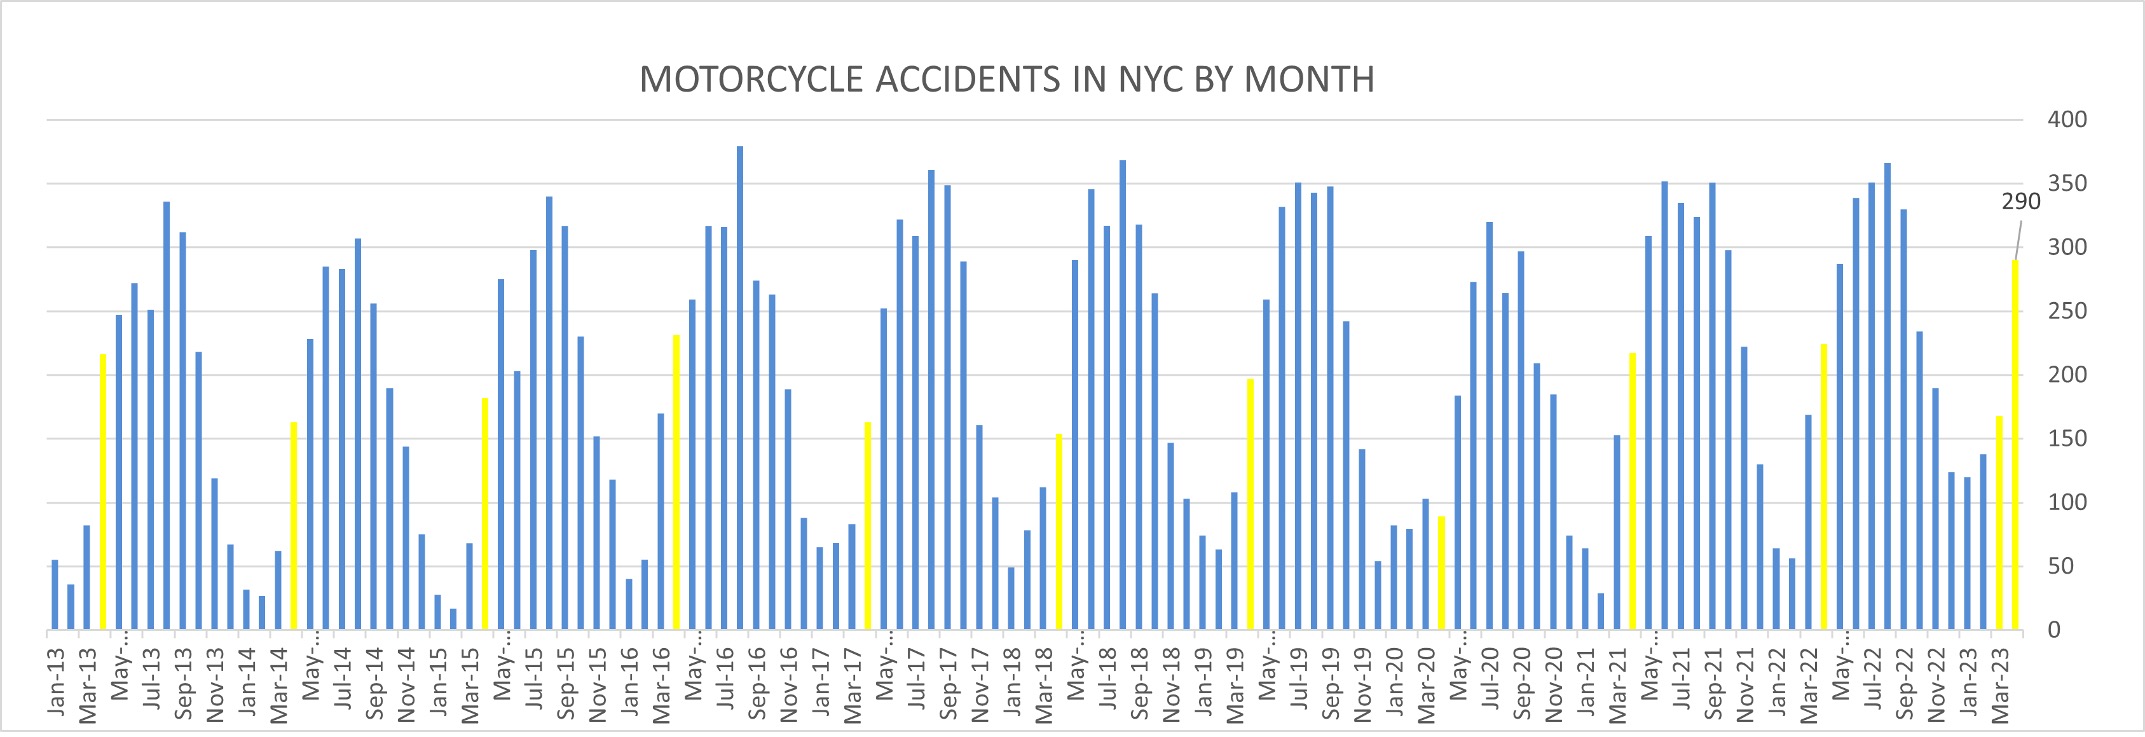 Motorcycle Accidents in NYC by Month